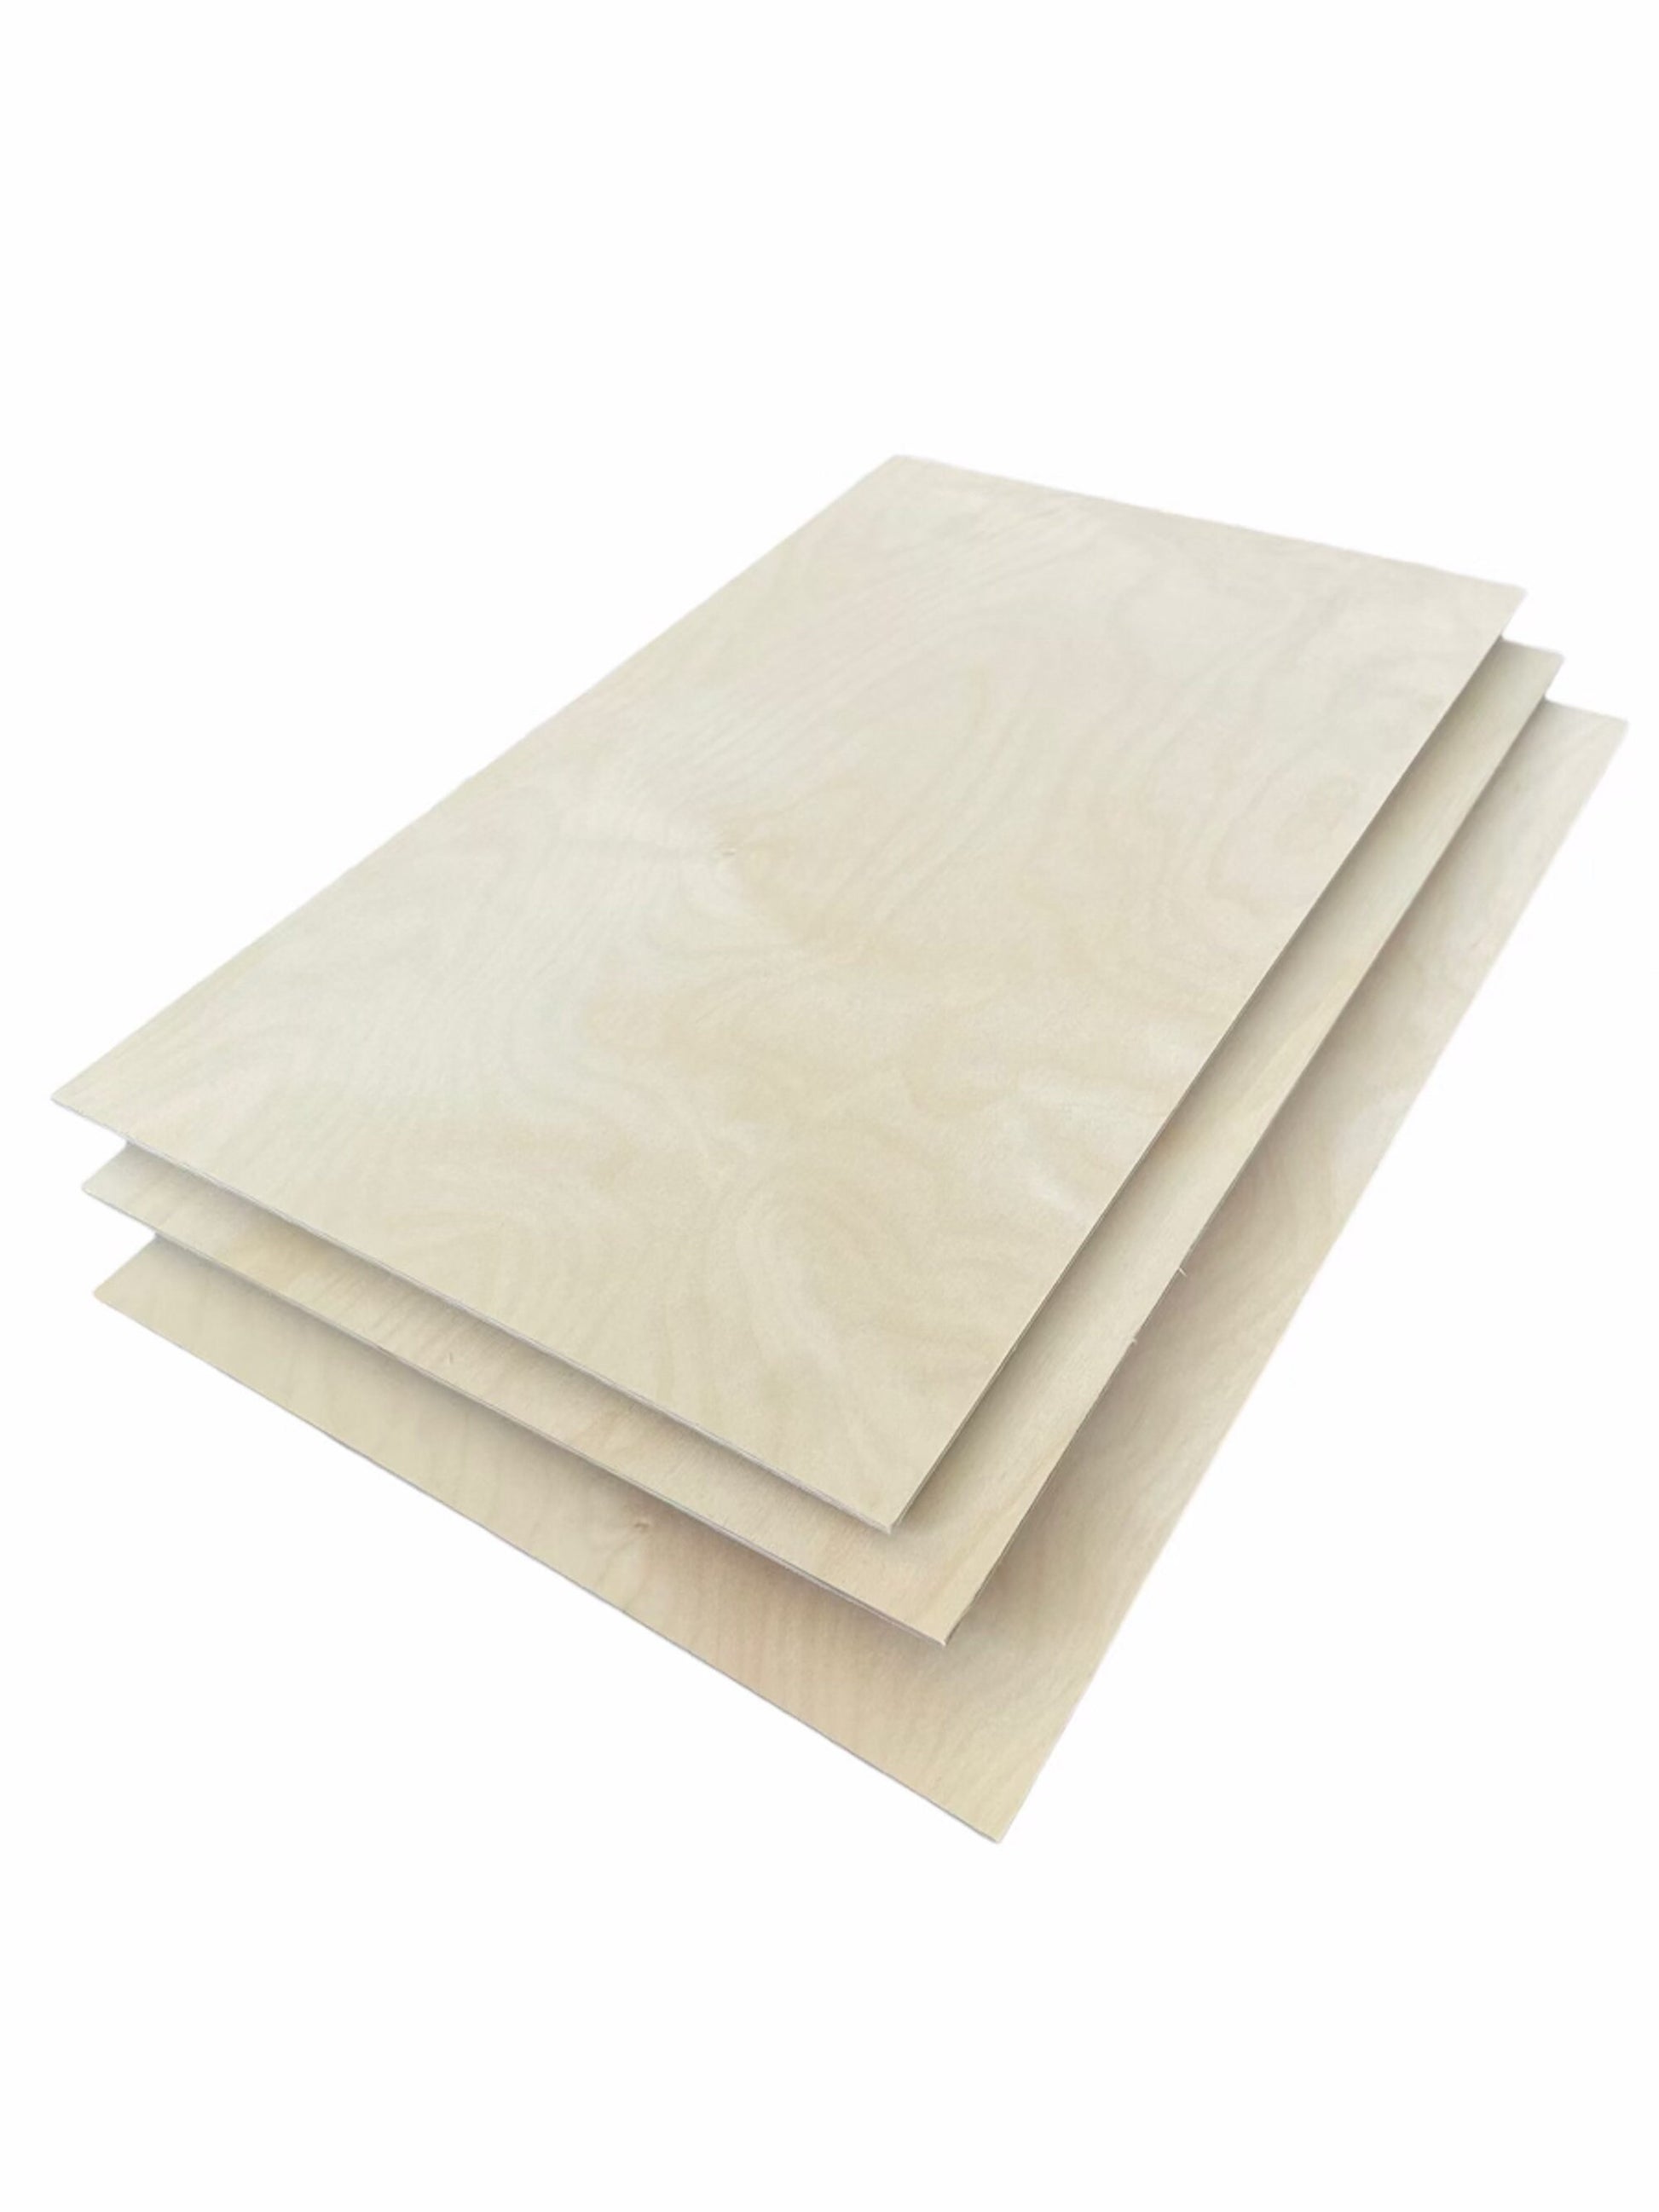 3mm (1/8) Premium Baltic Birch Plywood Sheets Ideal for Crafts